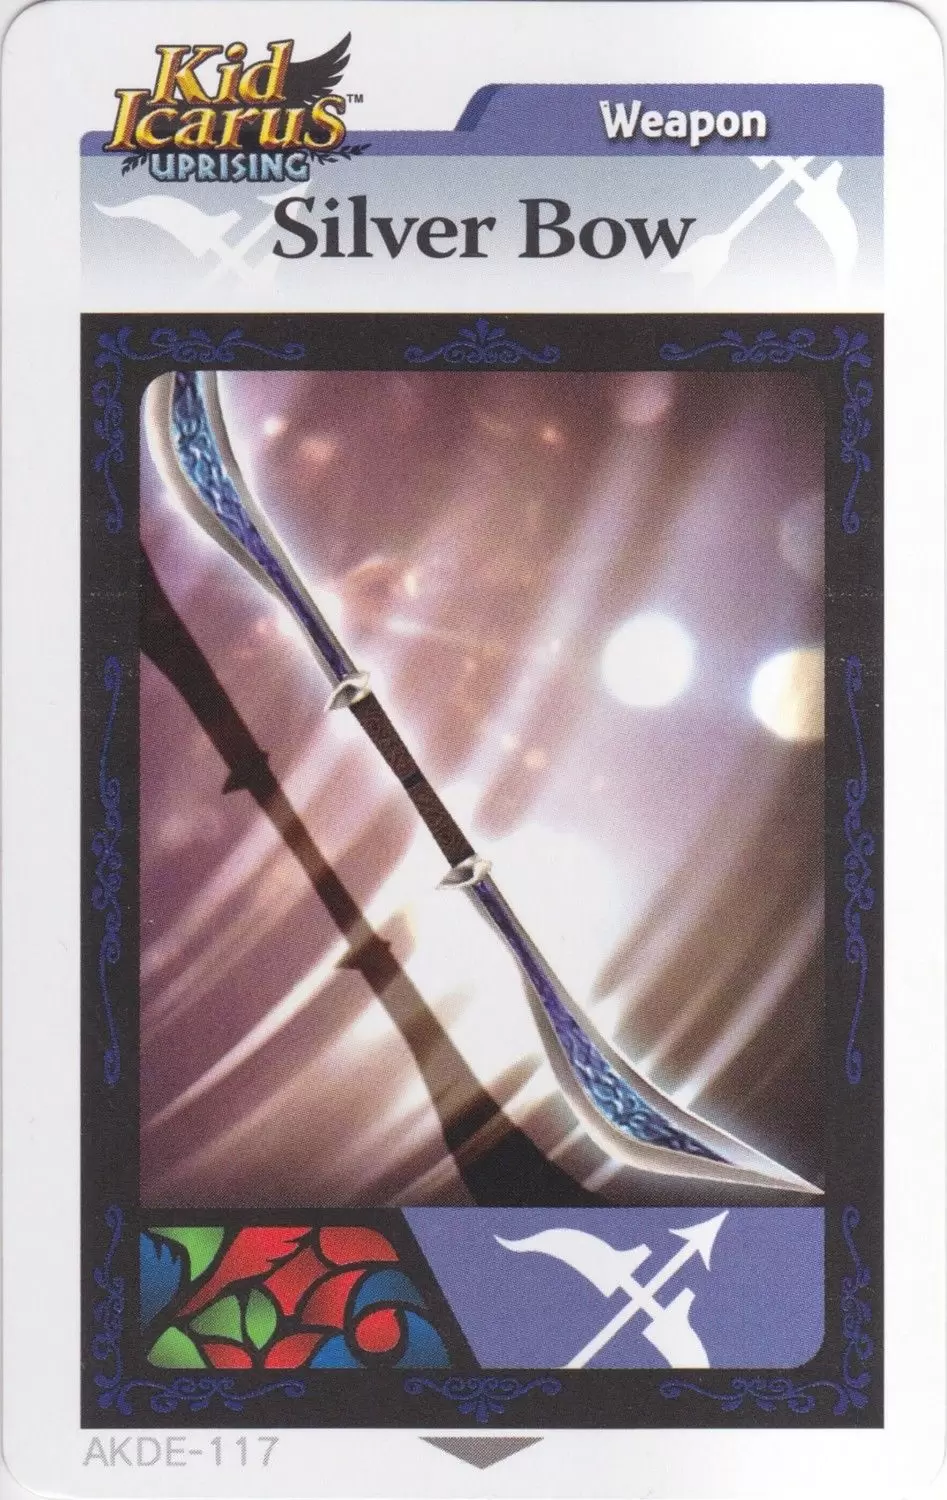 Kid Icarus Uprising AR cards - Silver Bow